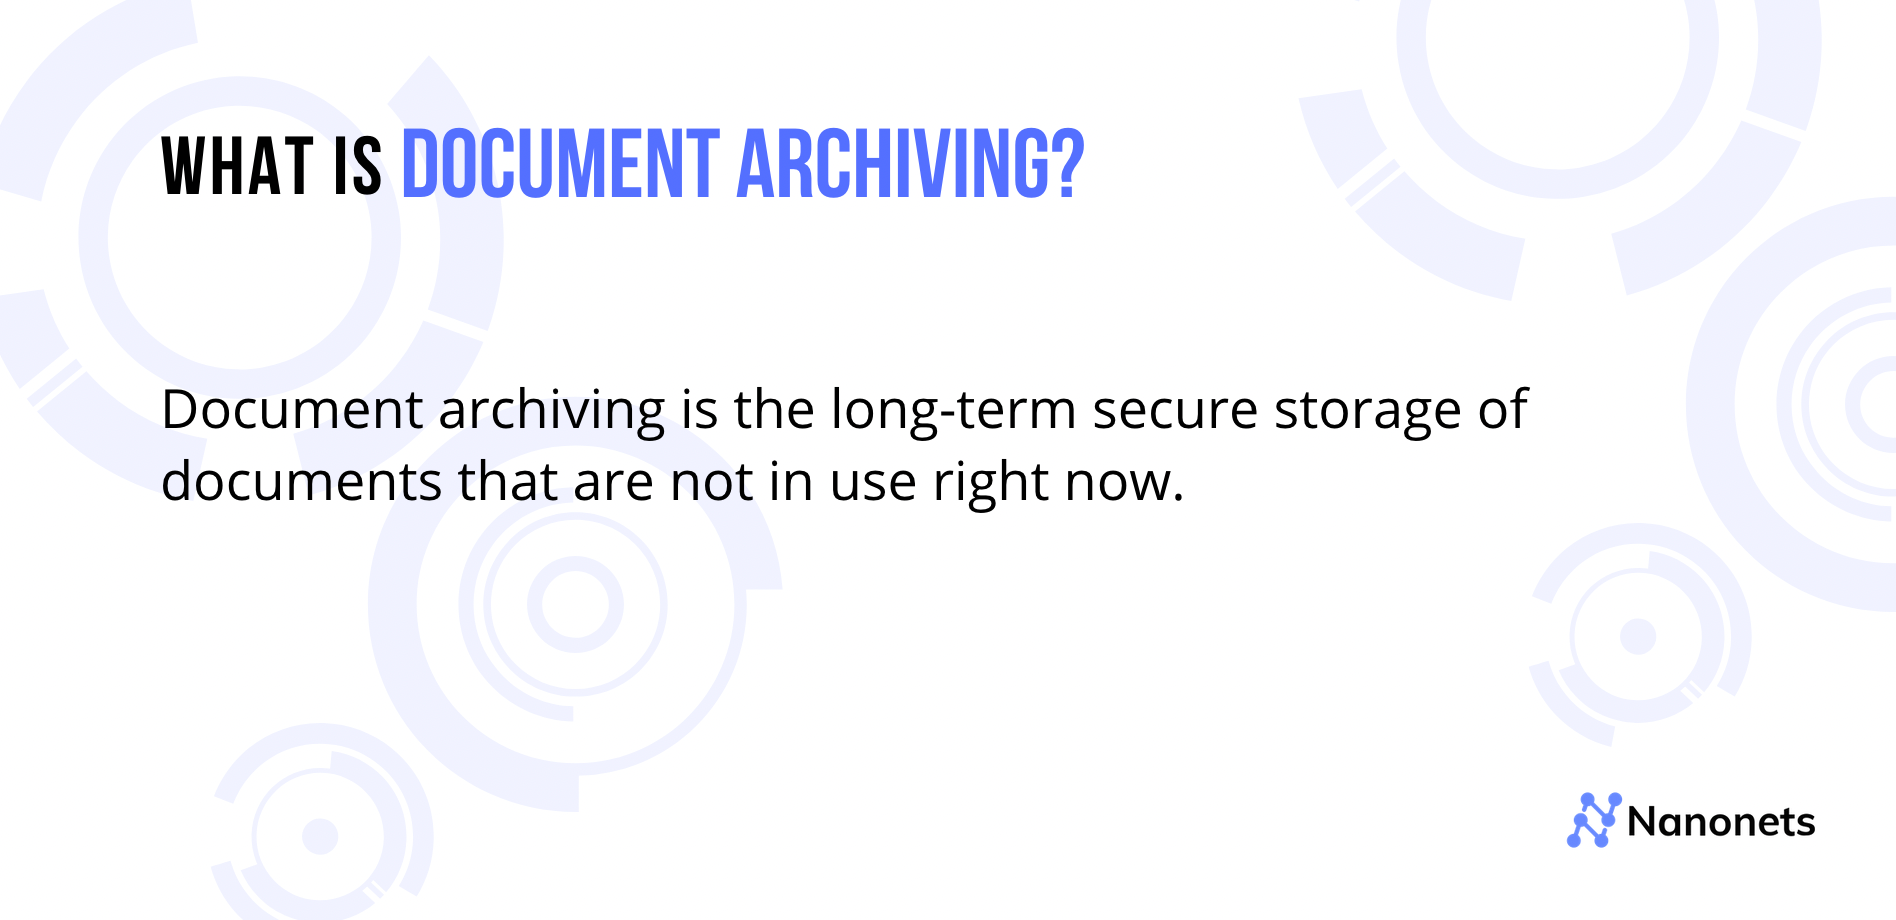 What is Document Archiving?